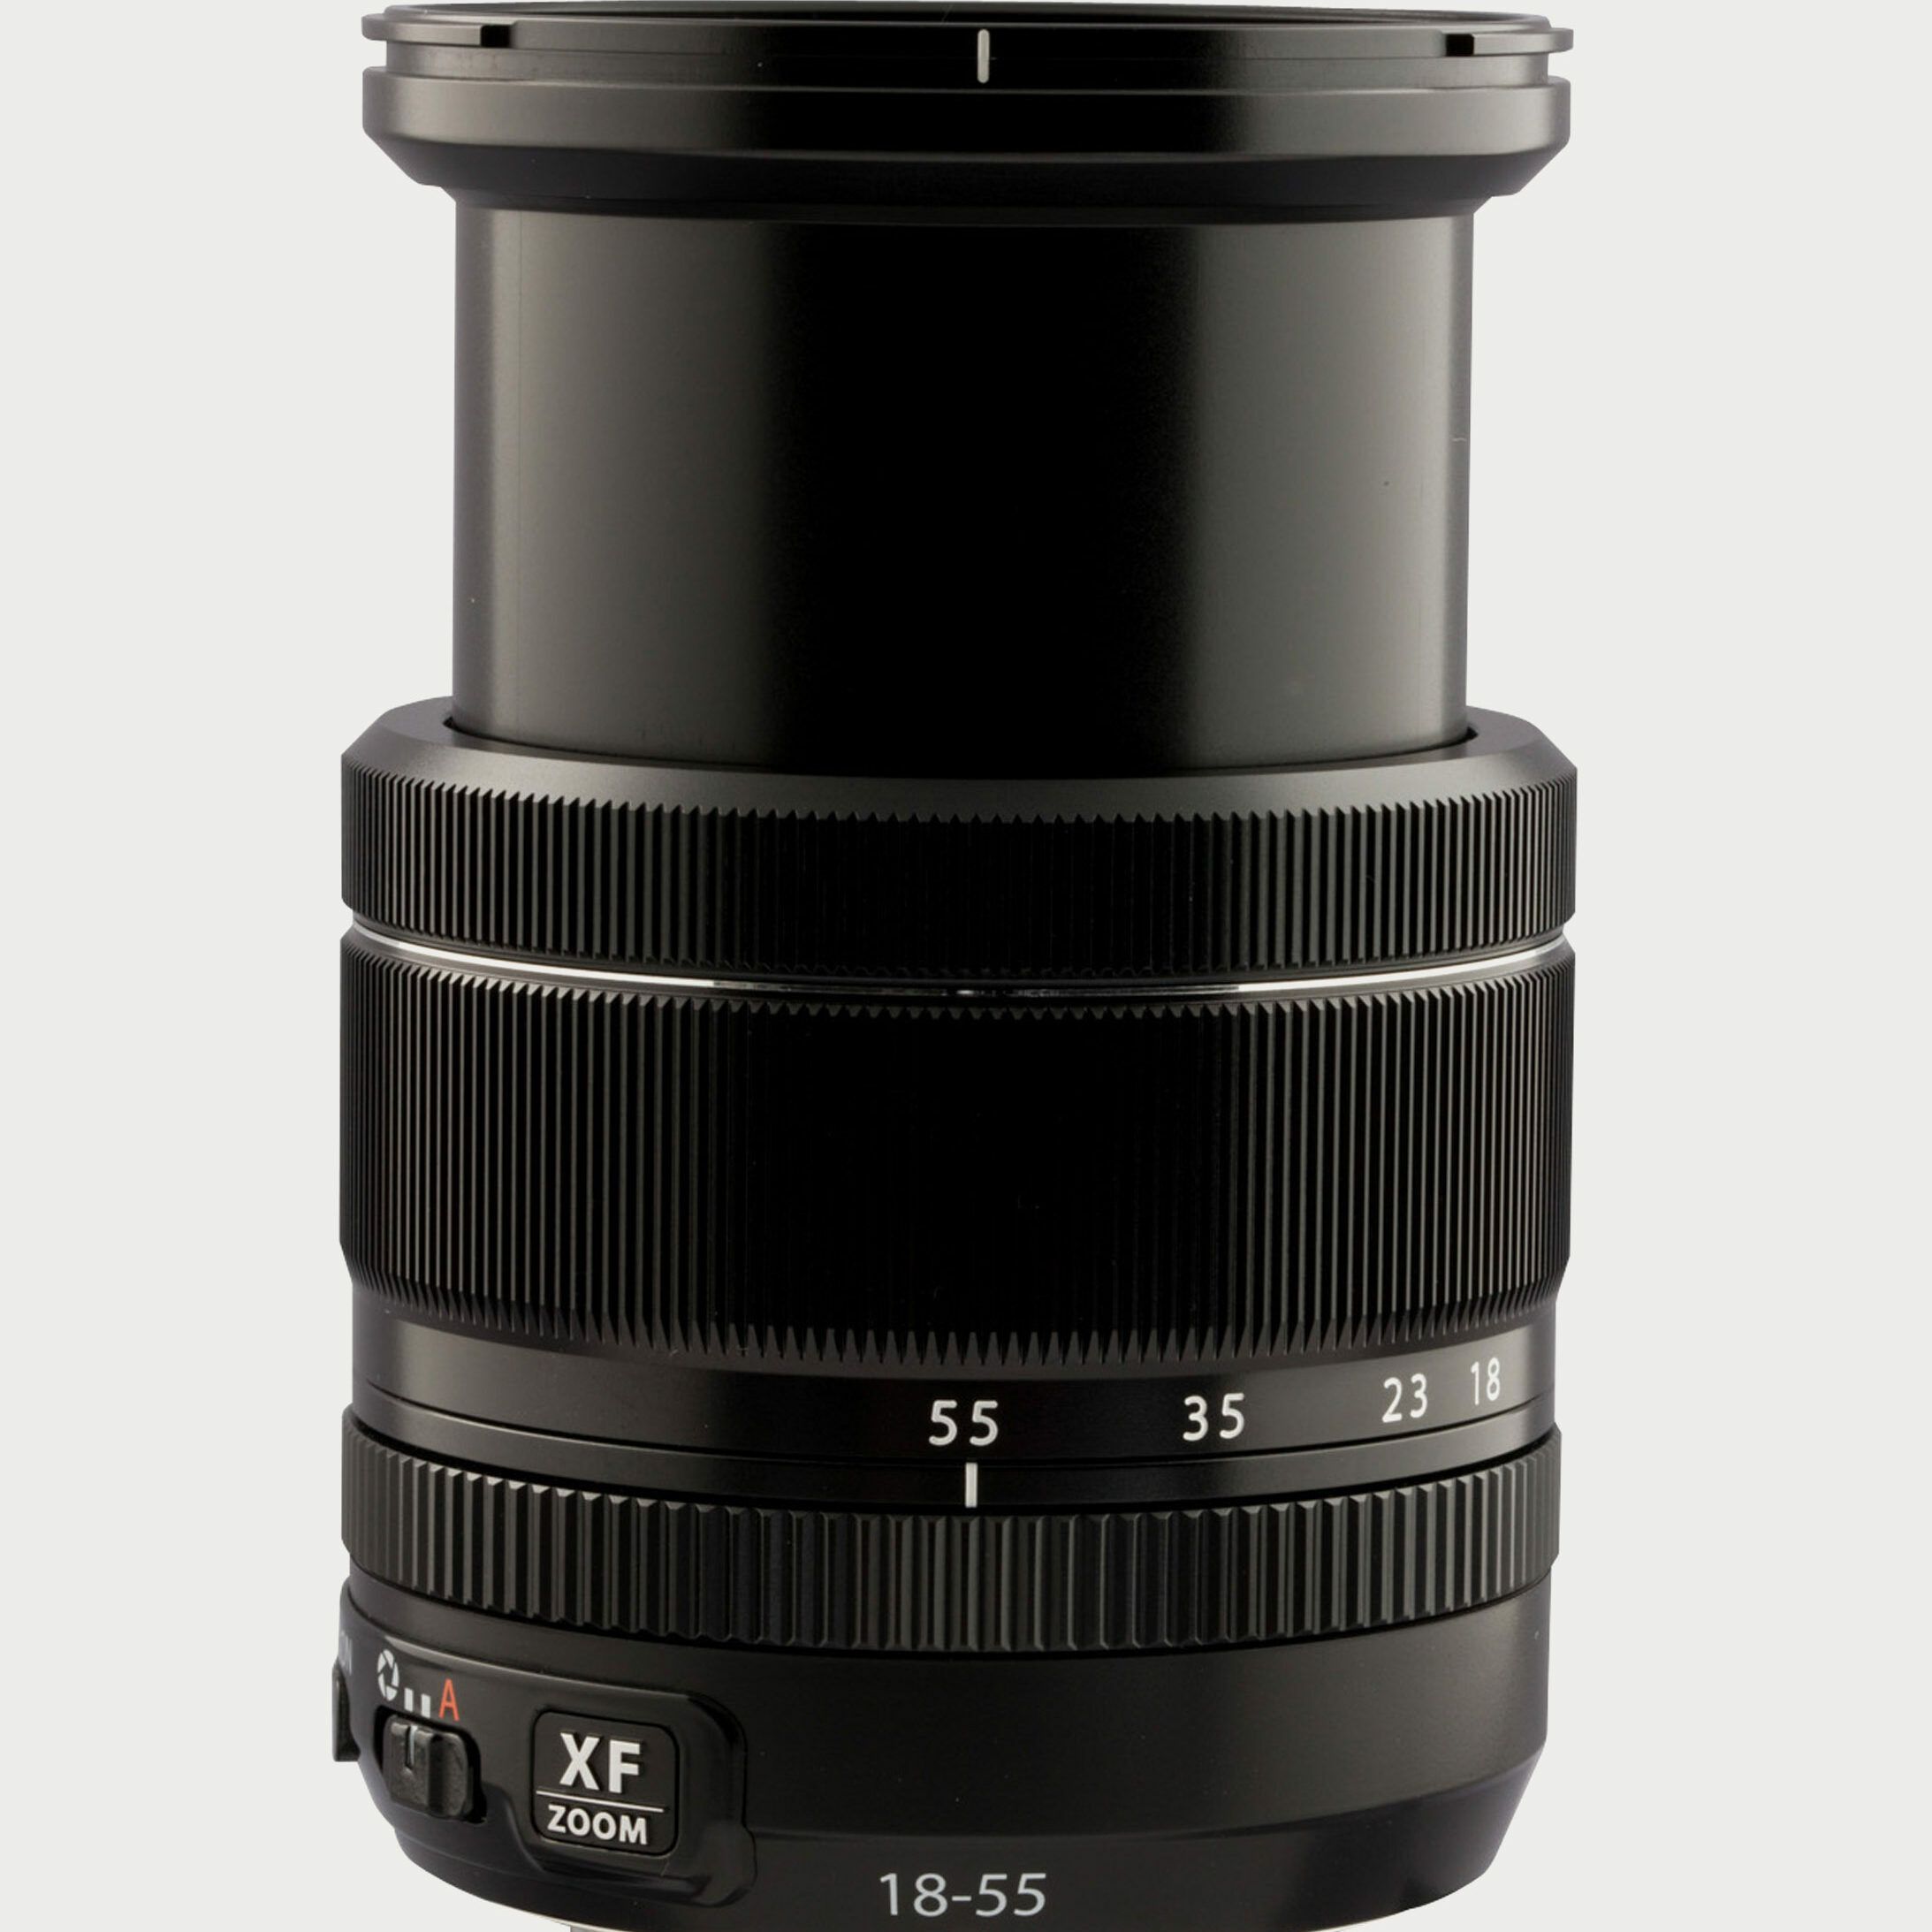 XF 18-55mm F2.8-4.0 R LM OIS Lens | Moment